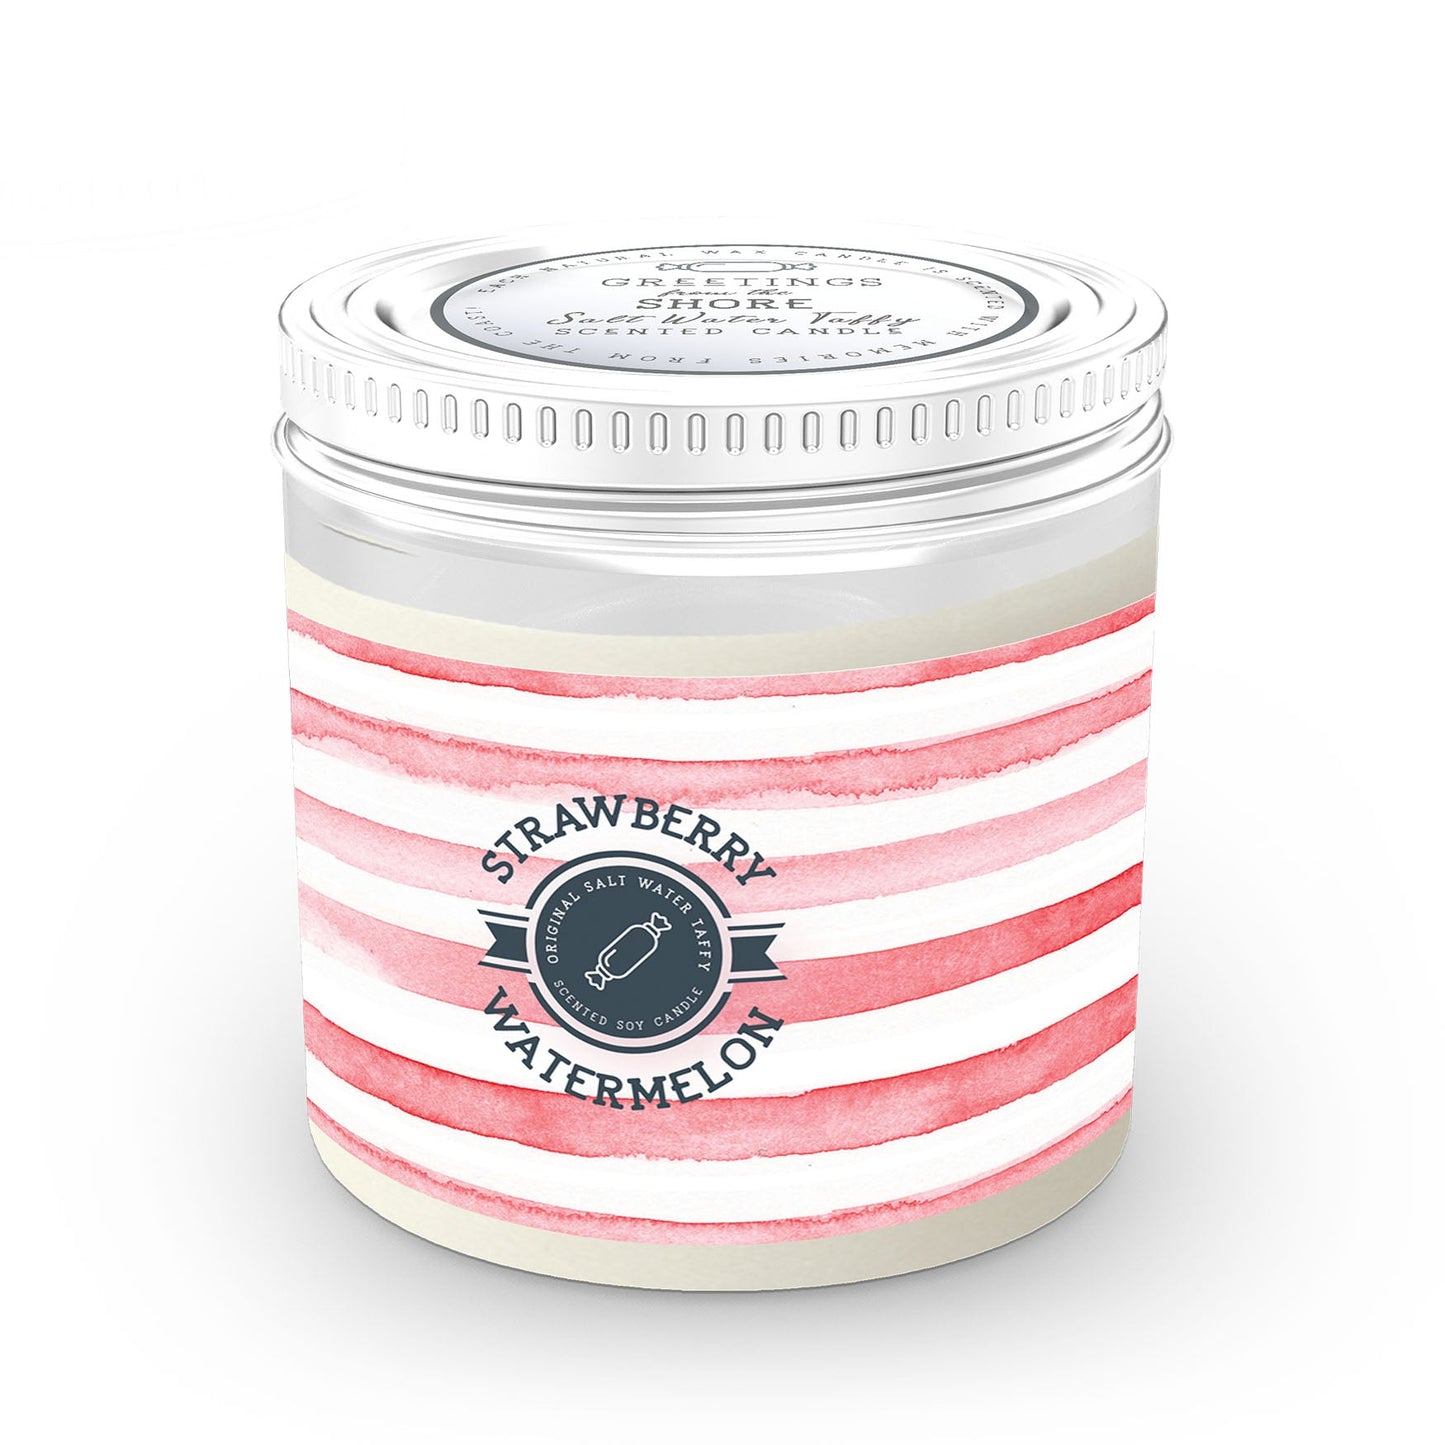 Strawberry Watermelon 13oz Candle - Salt Water Taffy Collection